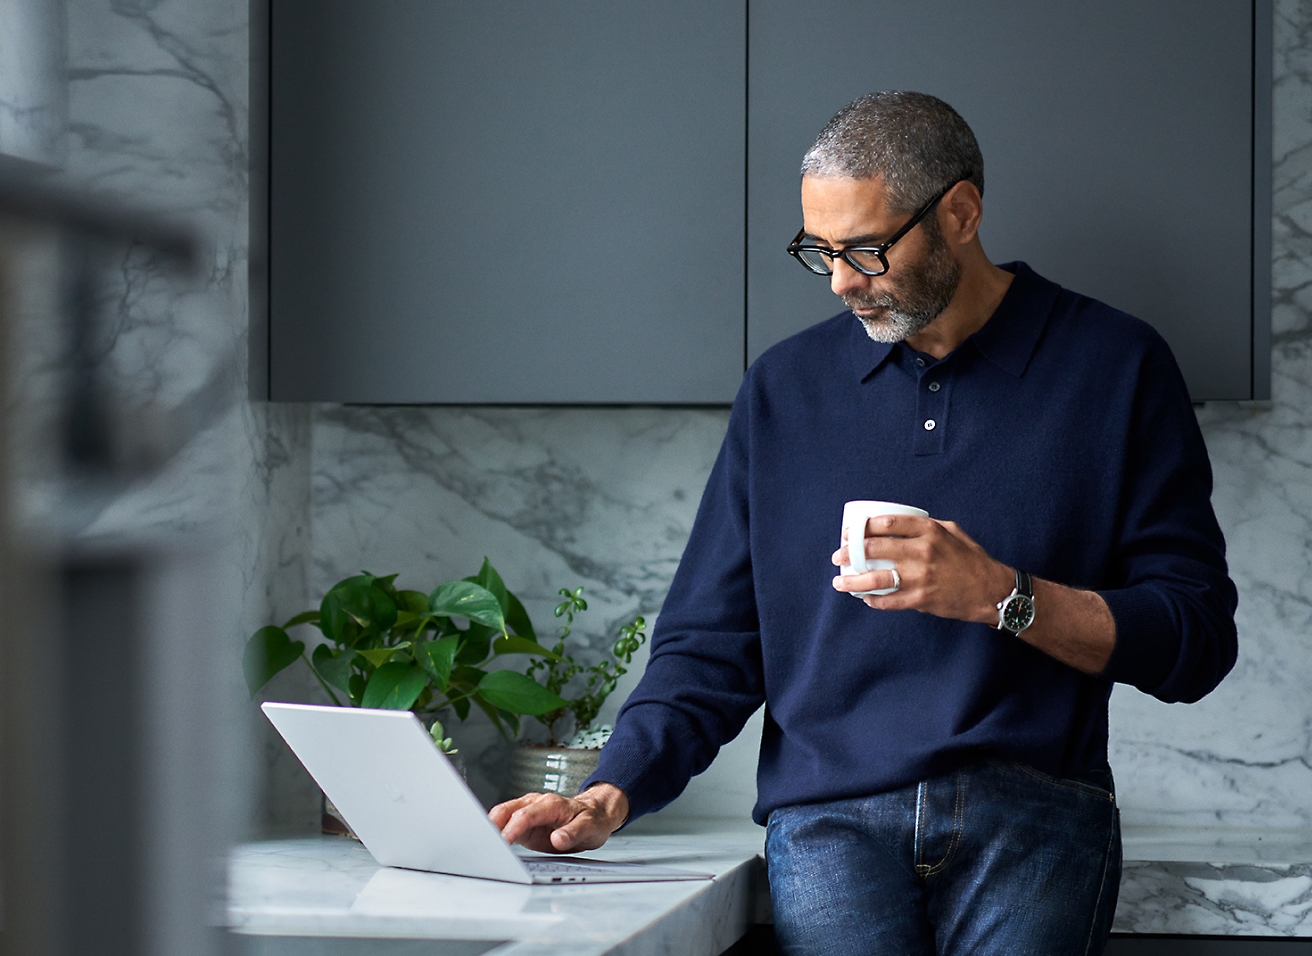 Middle-aged man with glasses, holding a cup and using a laptop on a marble counter in a modern kitchen.